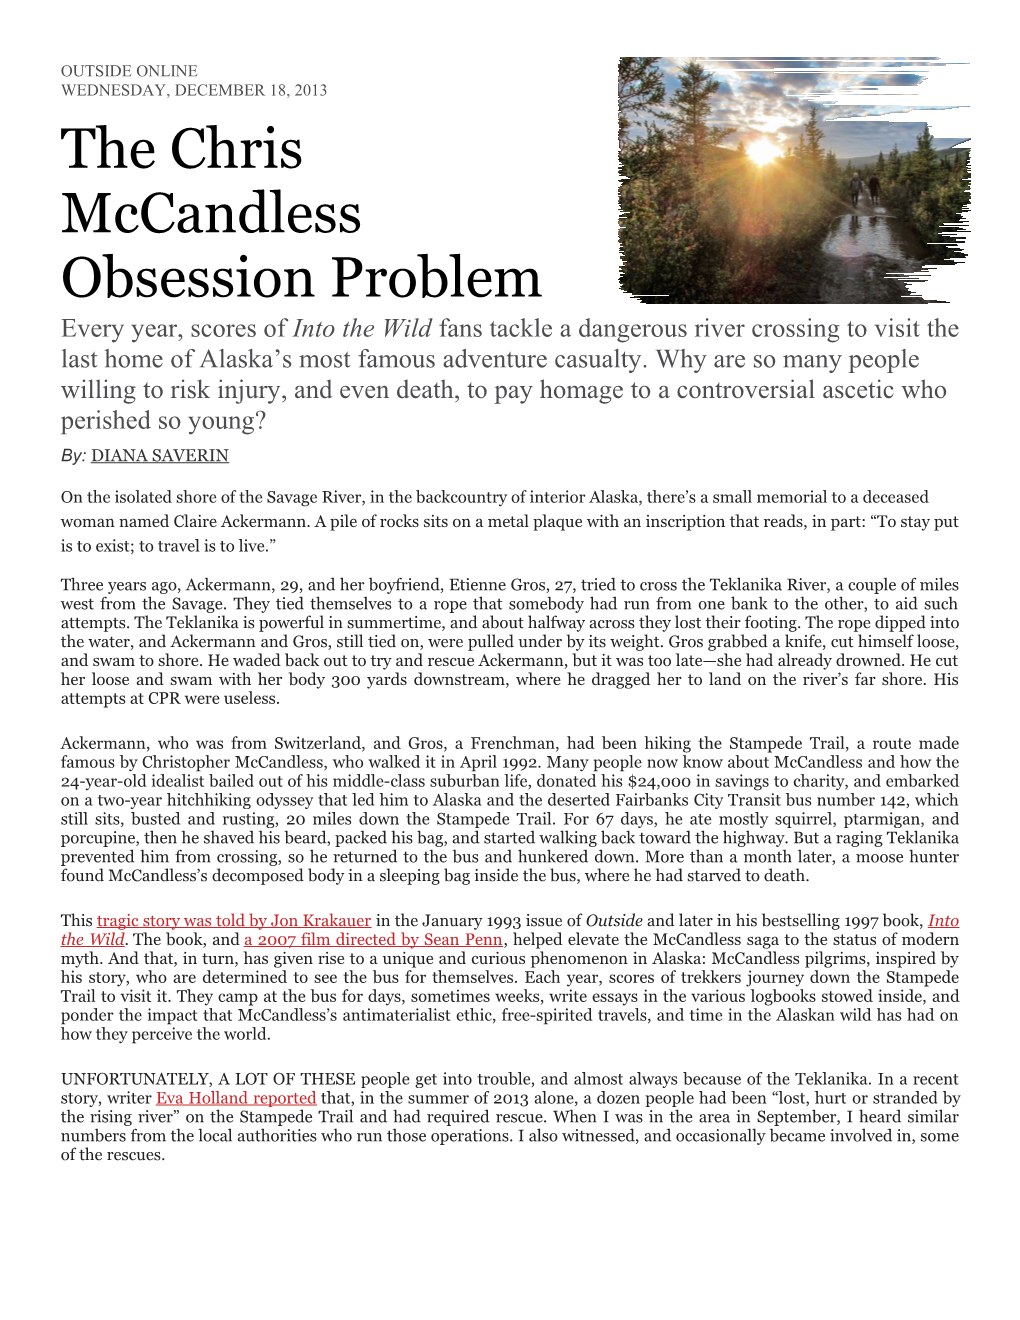 The Chris Mccandless Obsession Problem